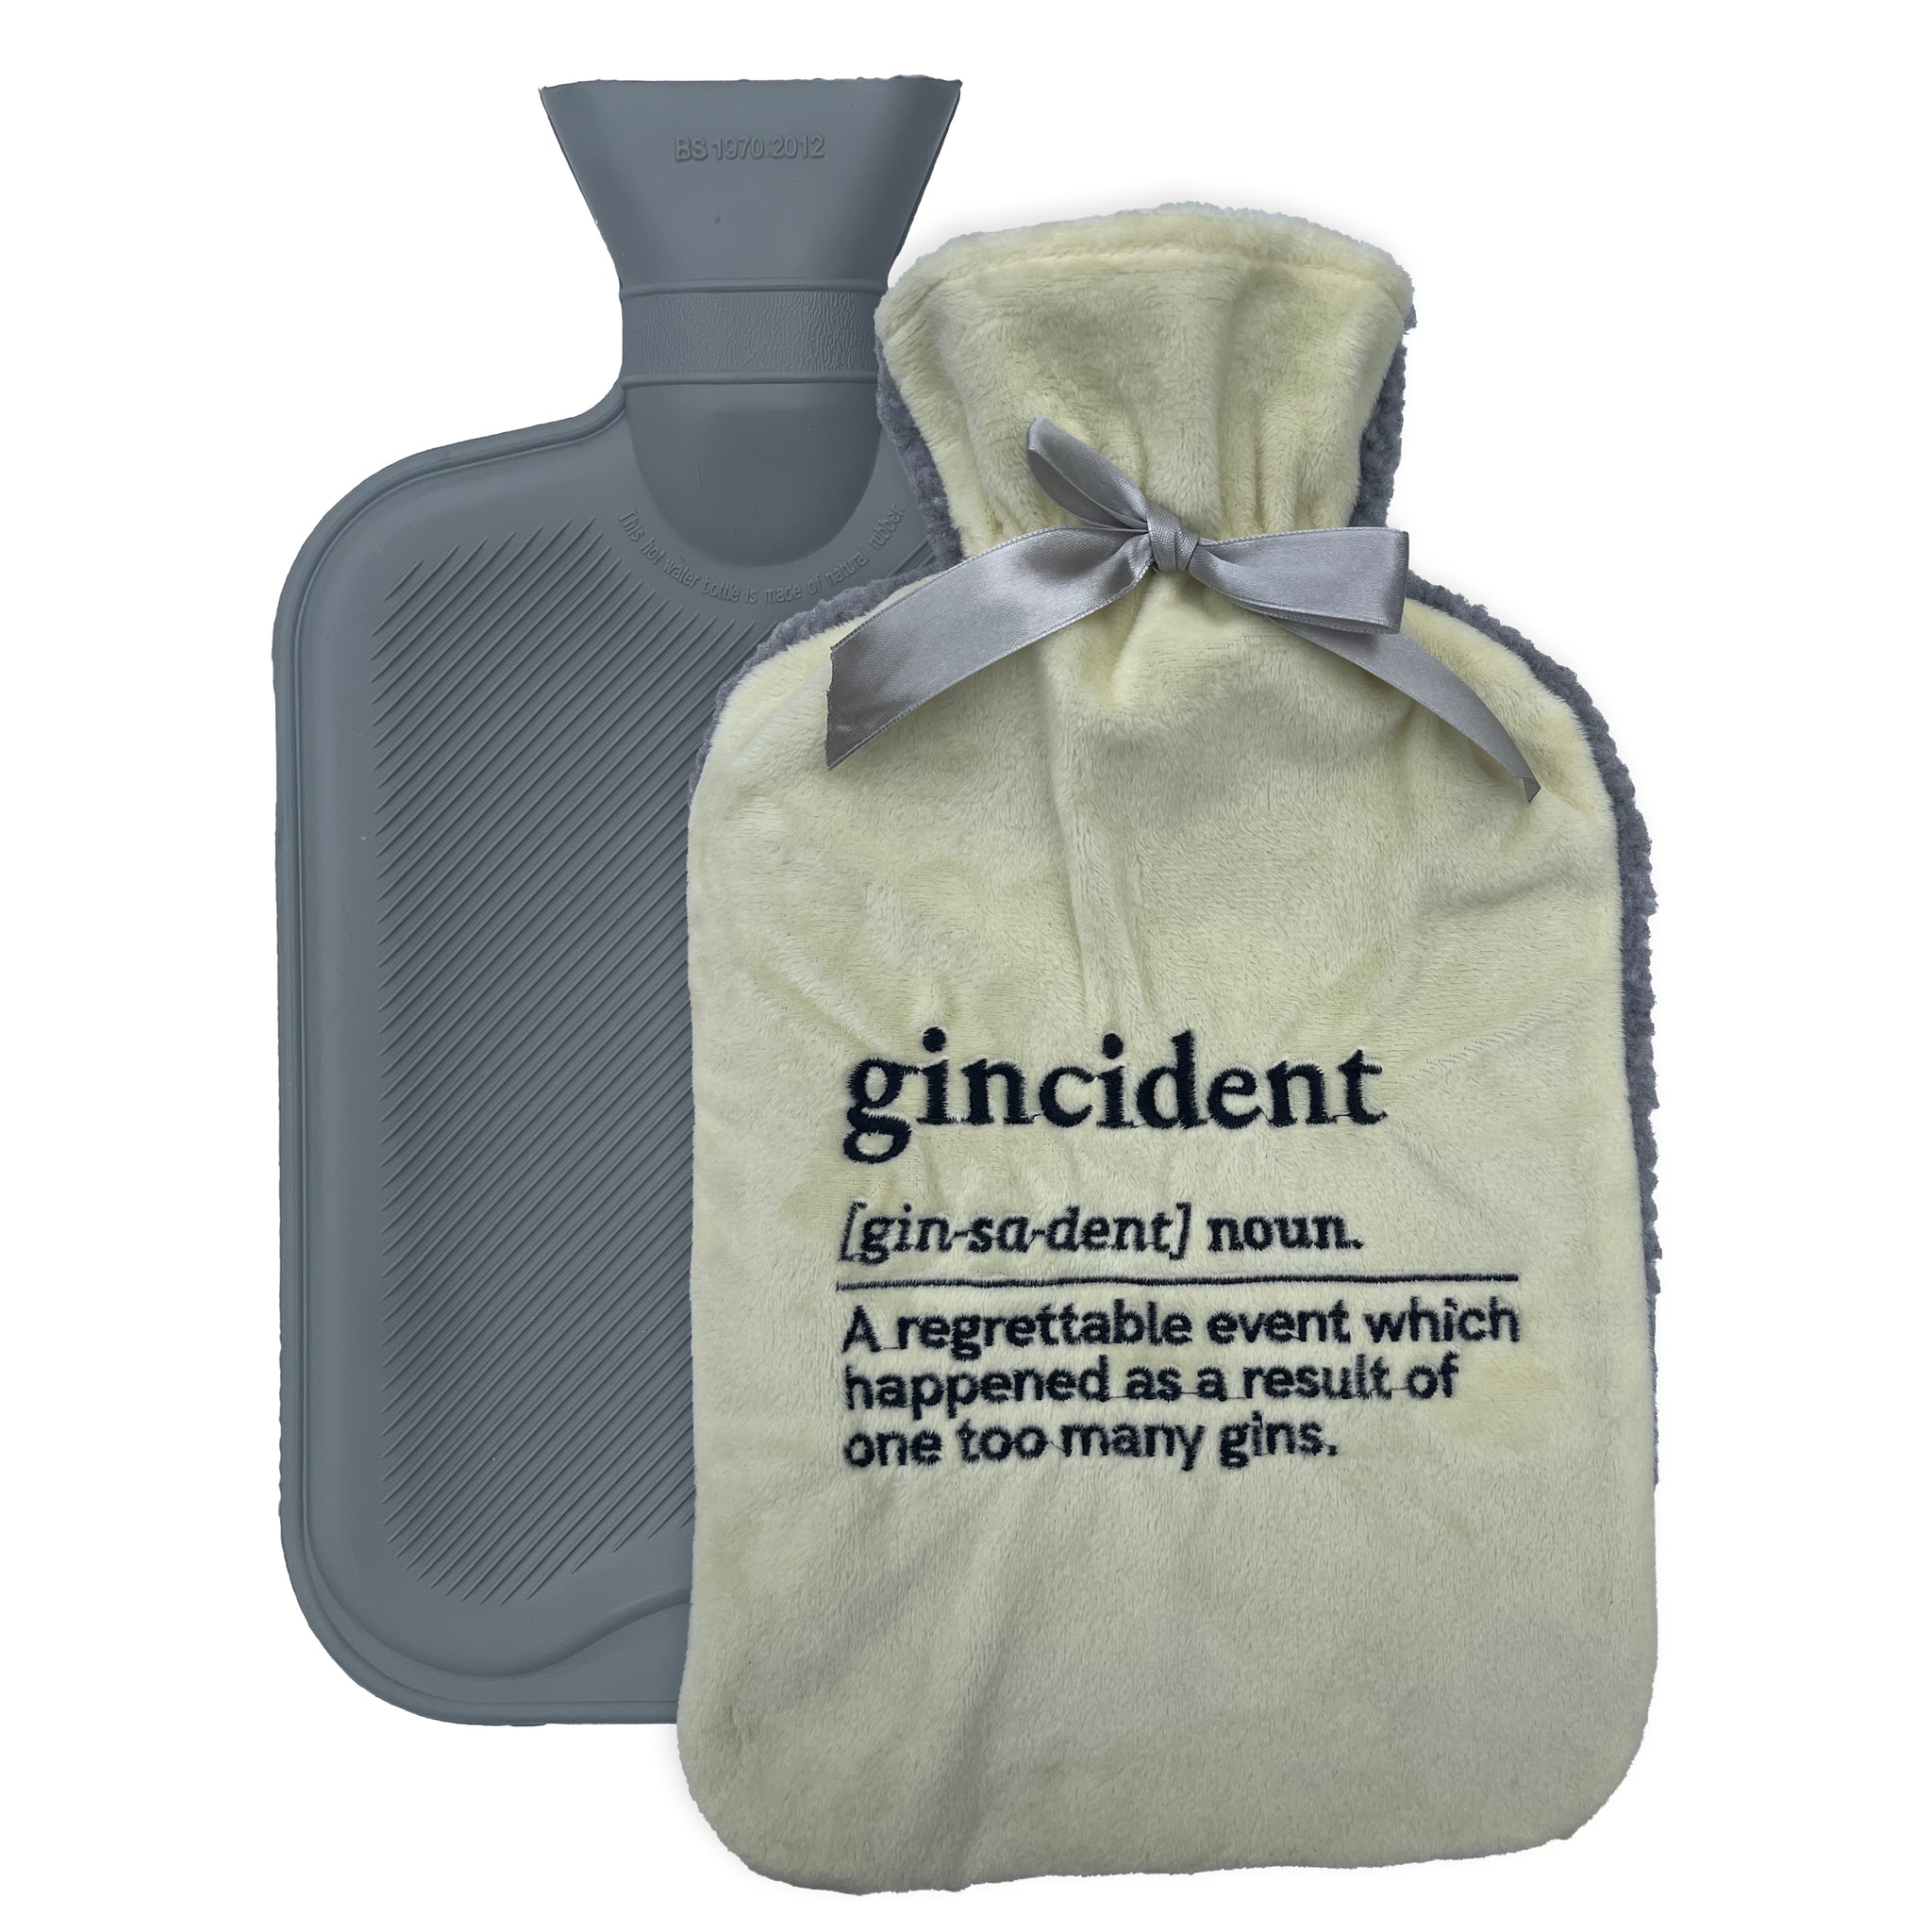 Hot Water Bottle with Sherpa Fleece Cover - 2 Litre - Gincident